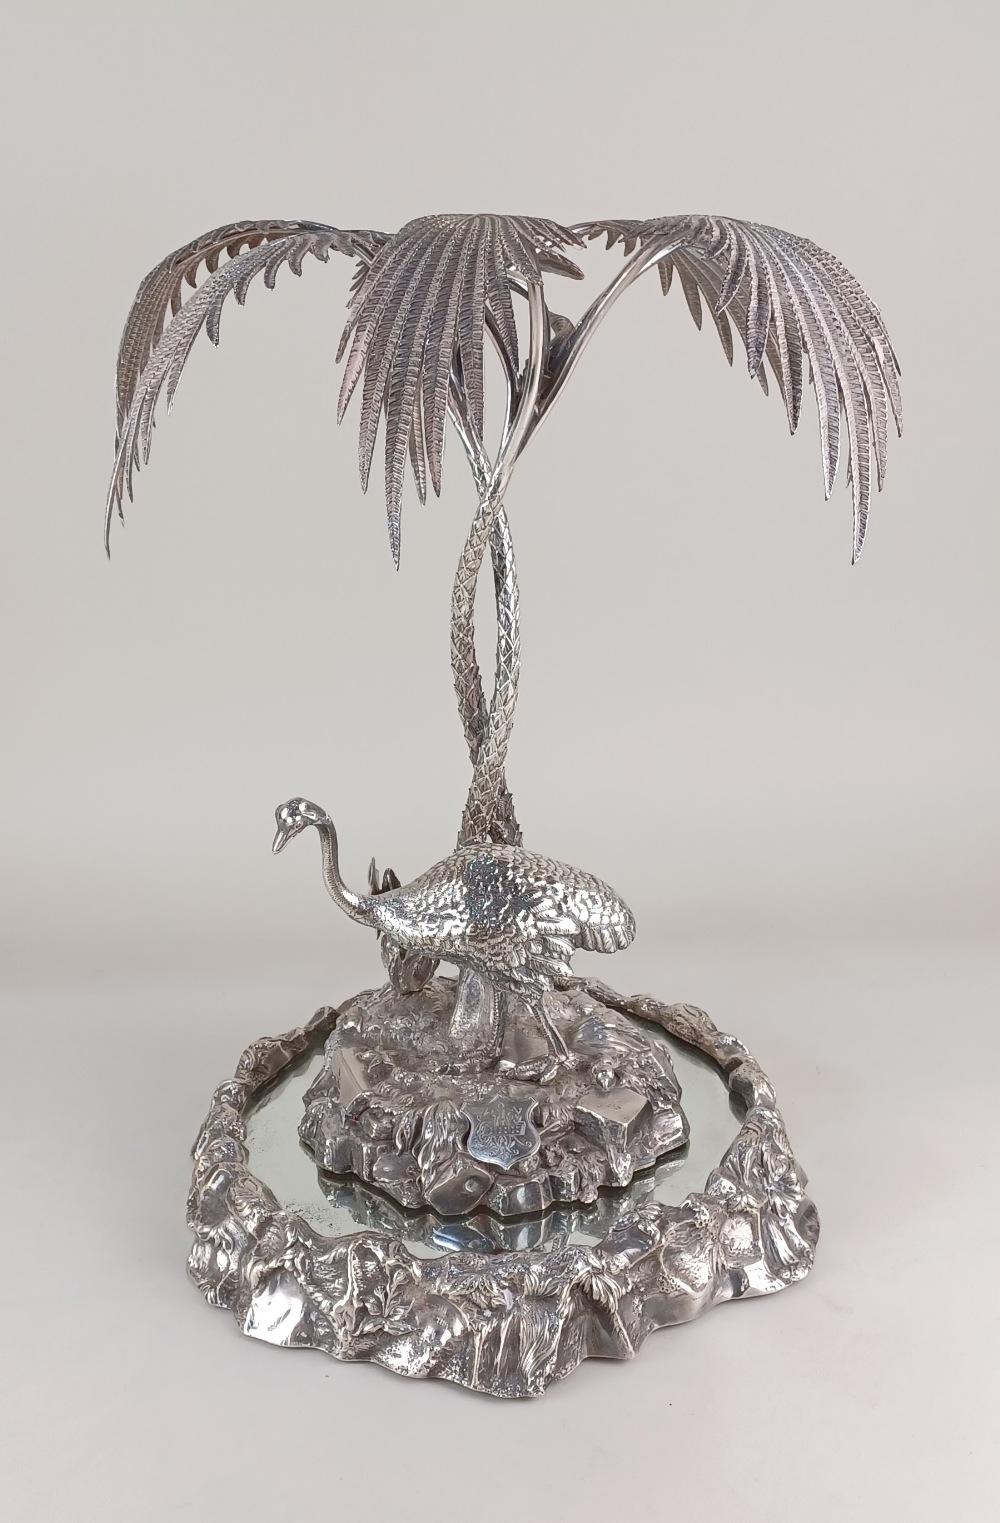 A Victorian electroplated epergne centrepiece by Elkington and Co, presented, modelled as an emu